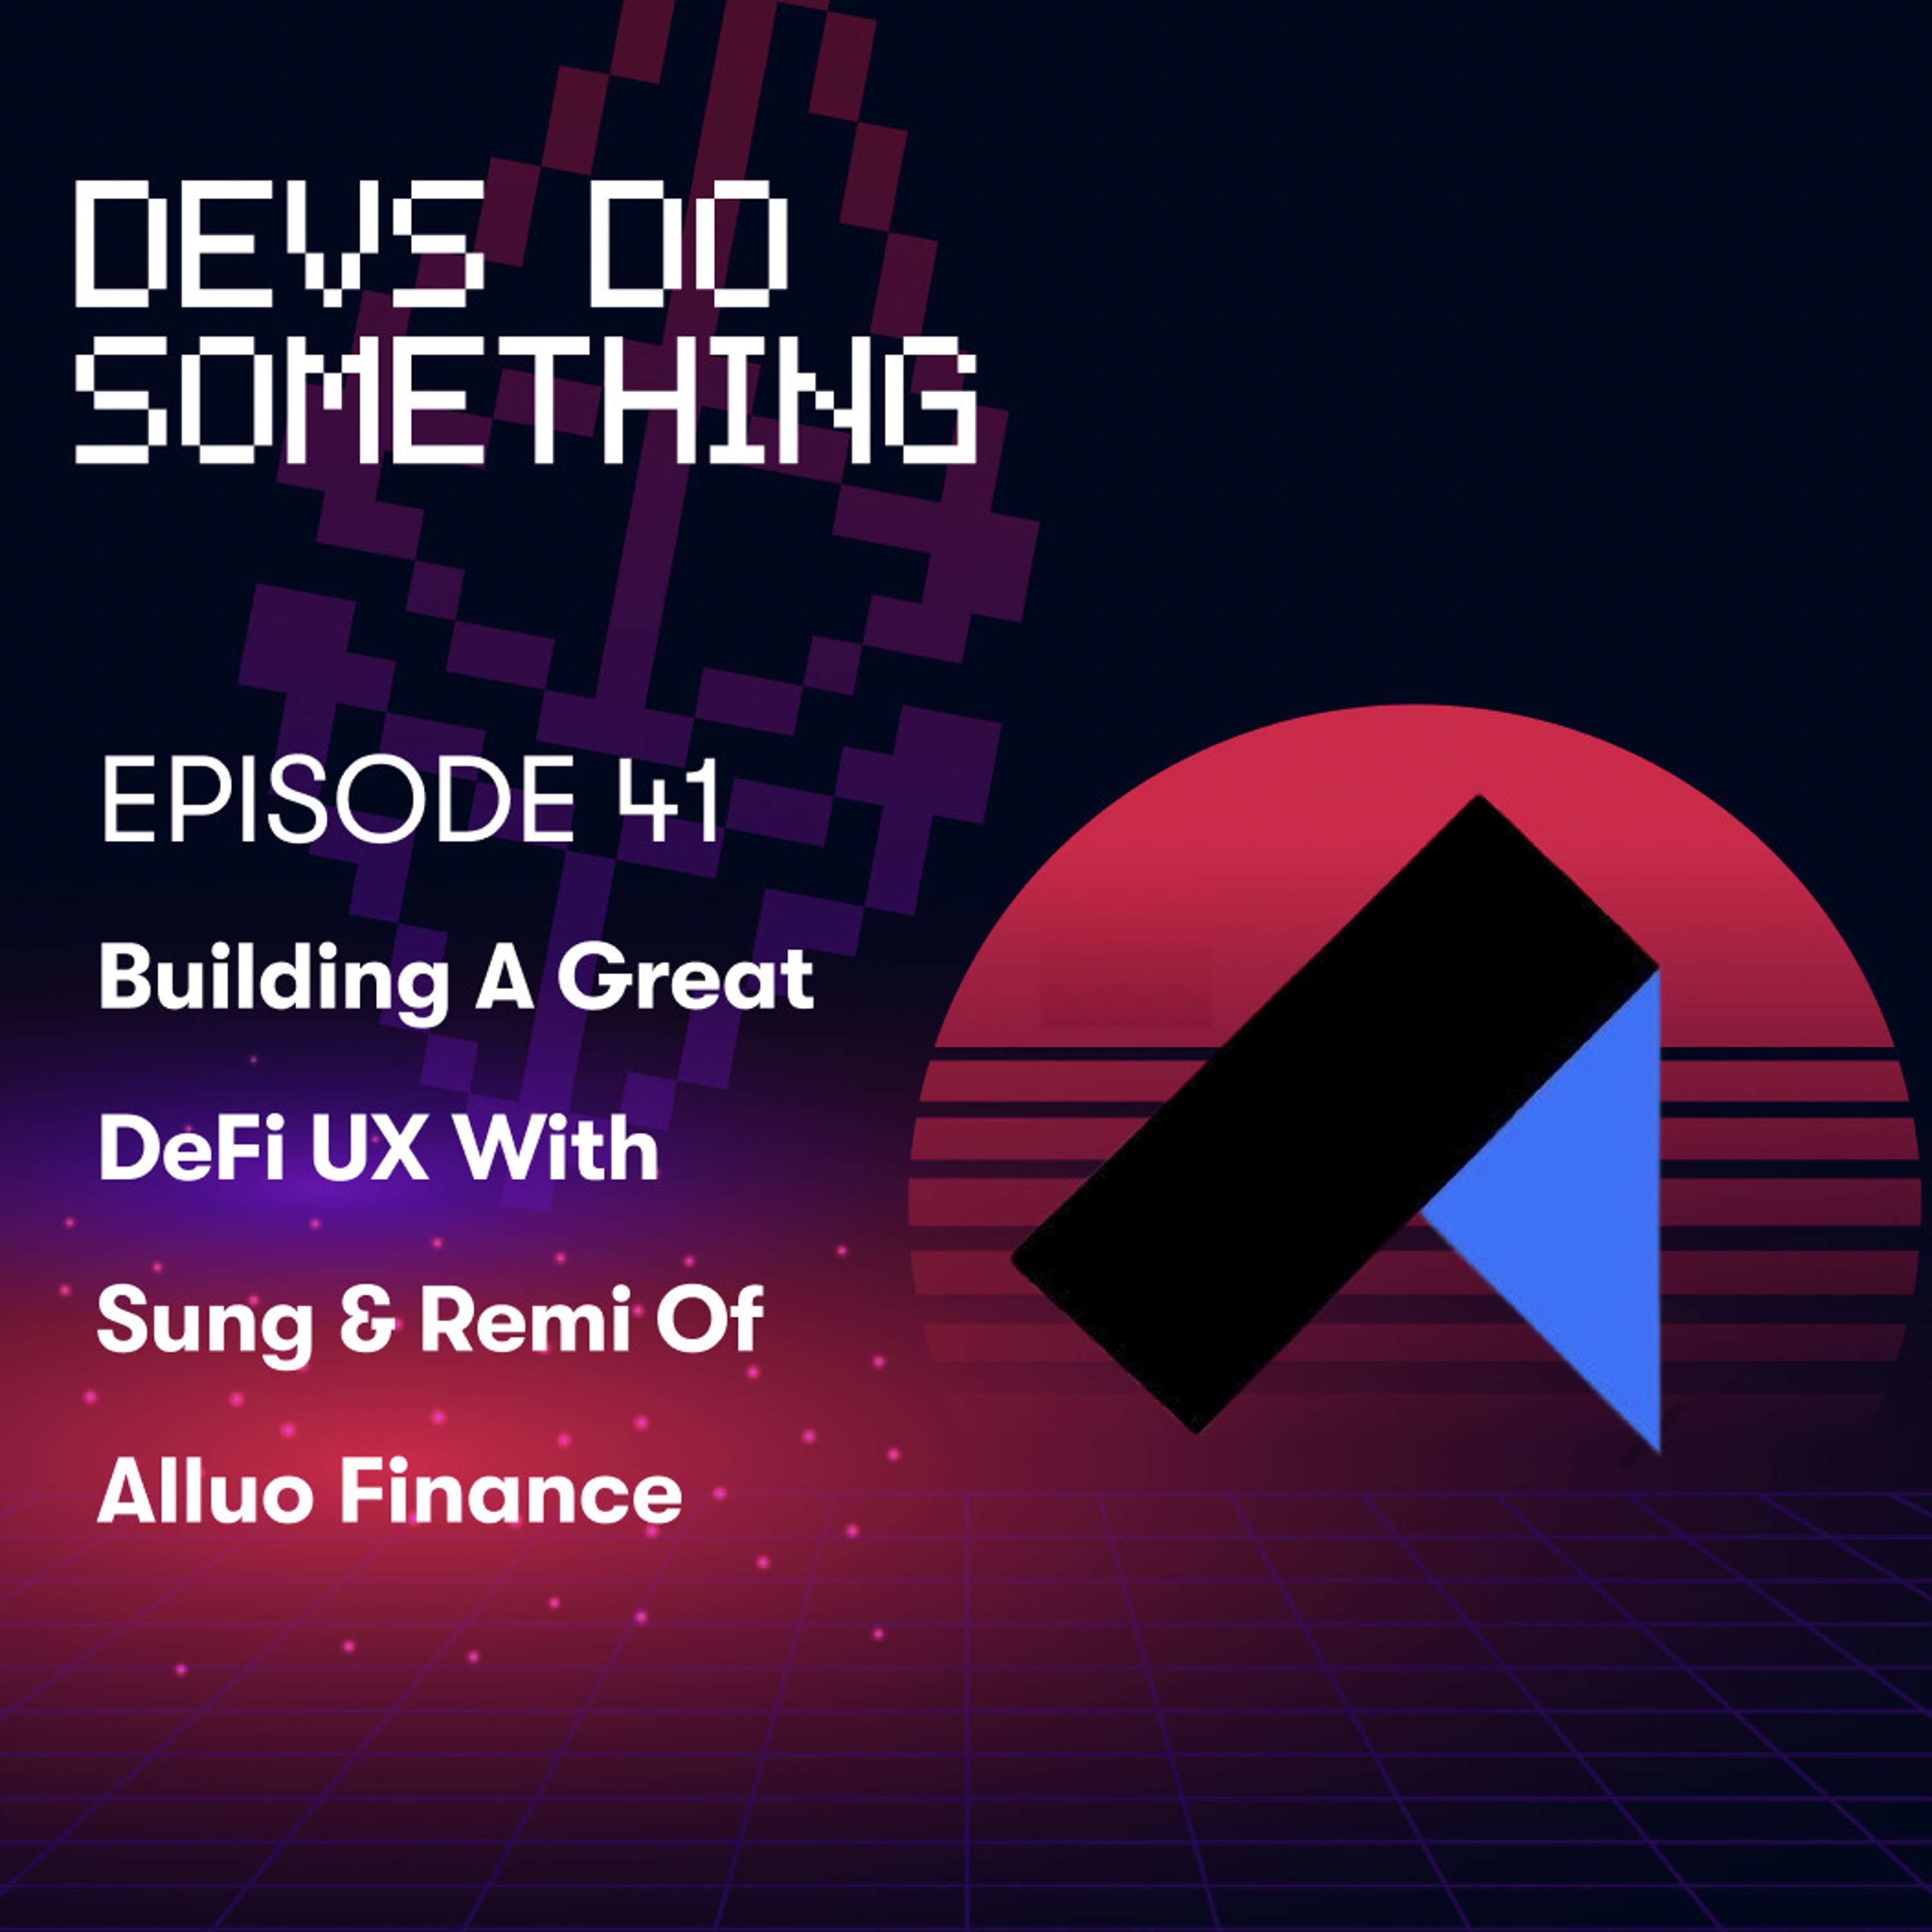 Alluo Finance - How to Build a Great DeFi UX